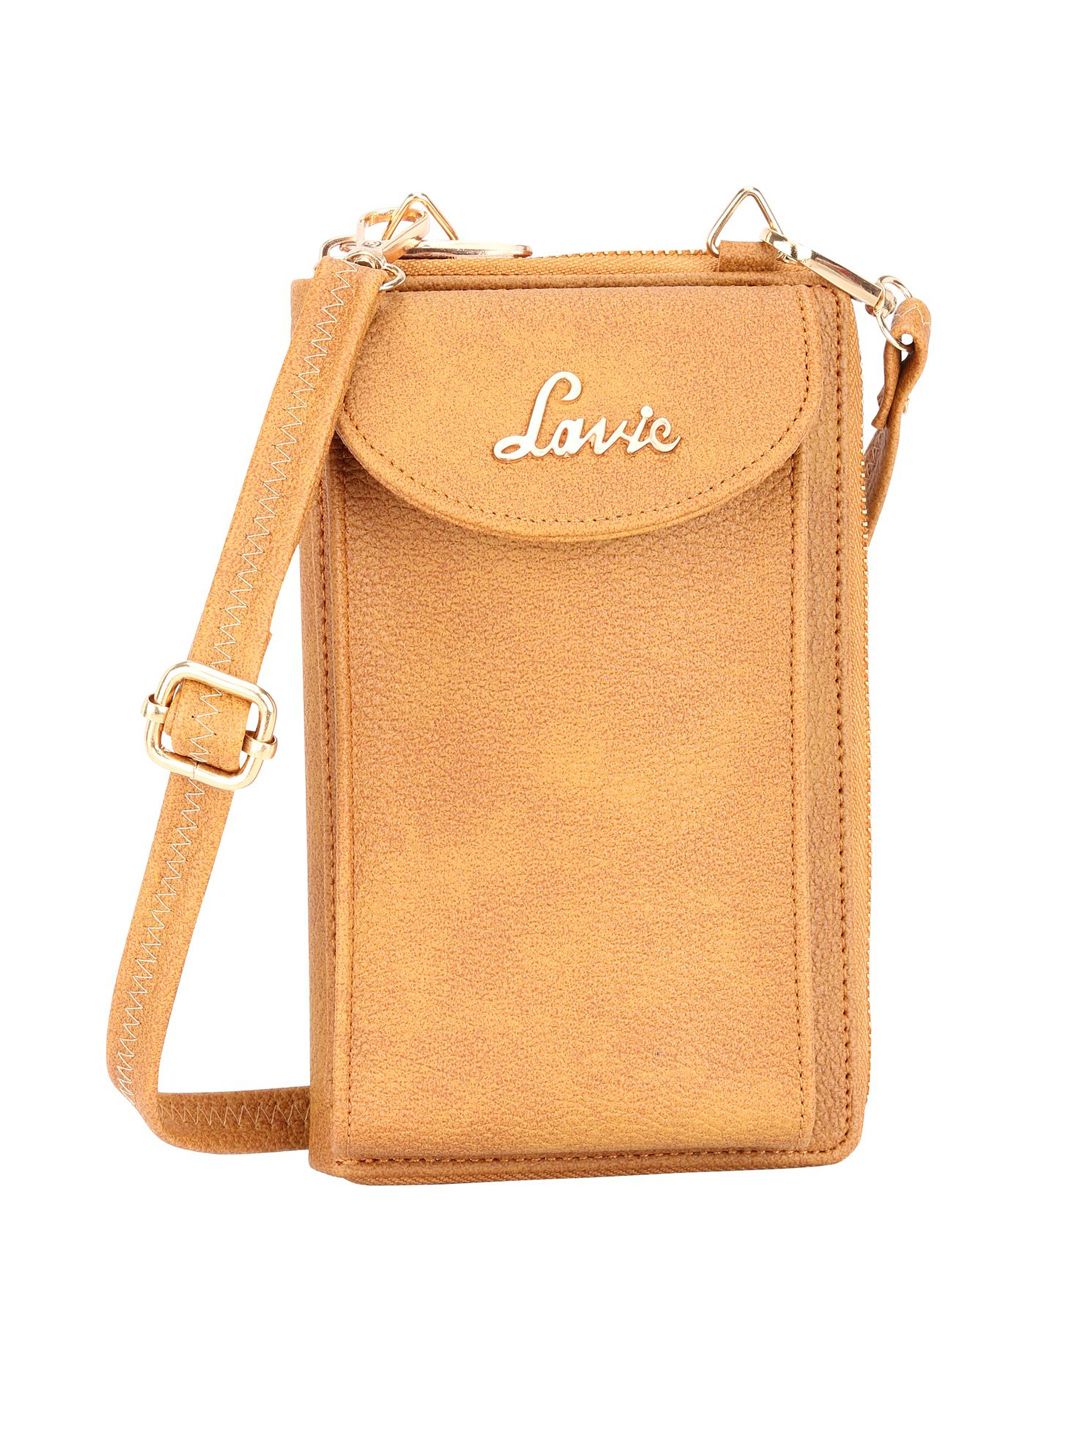 Lavie Women Camel Brown Solid PU Zip Around Wallet with Sling Strap Price in India